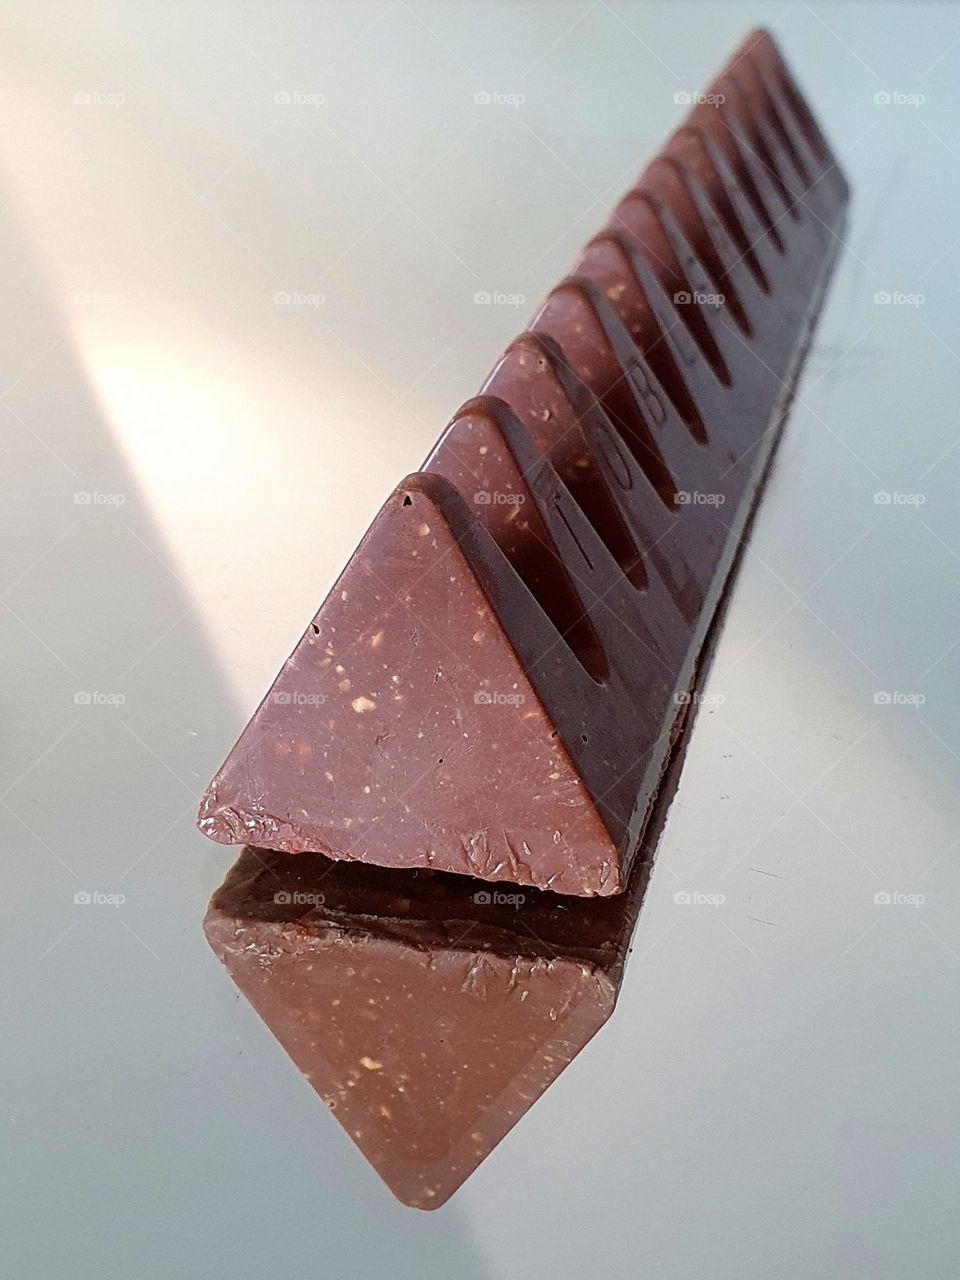 triangle - Toblerone - triangular chocolate with almonds - see double